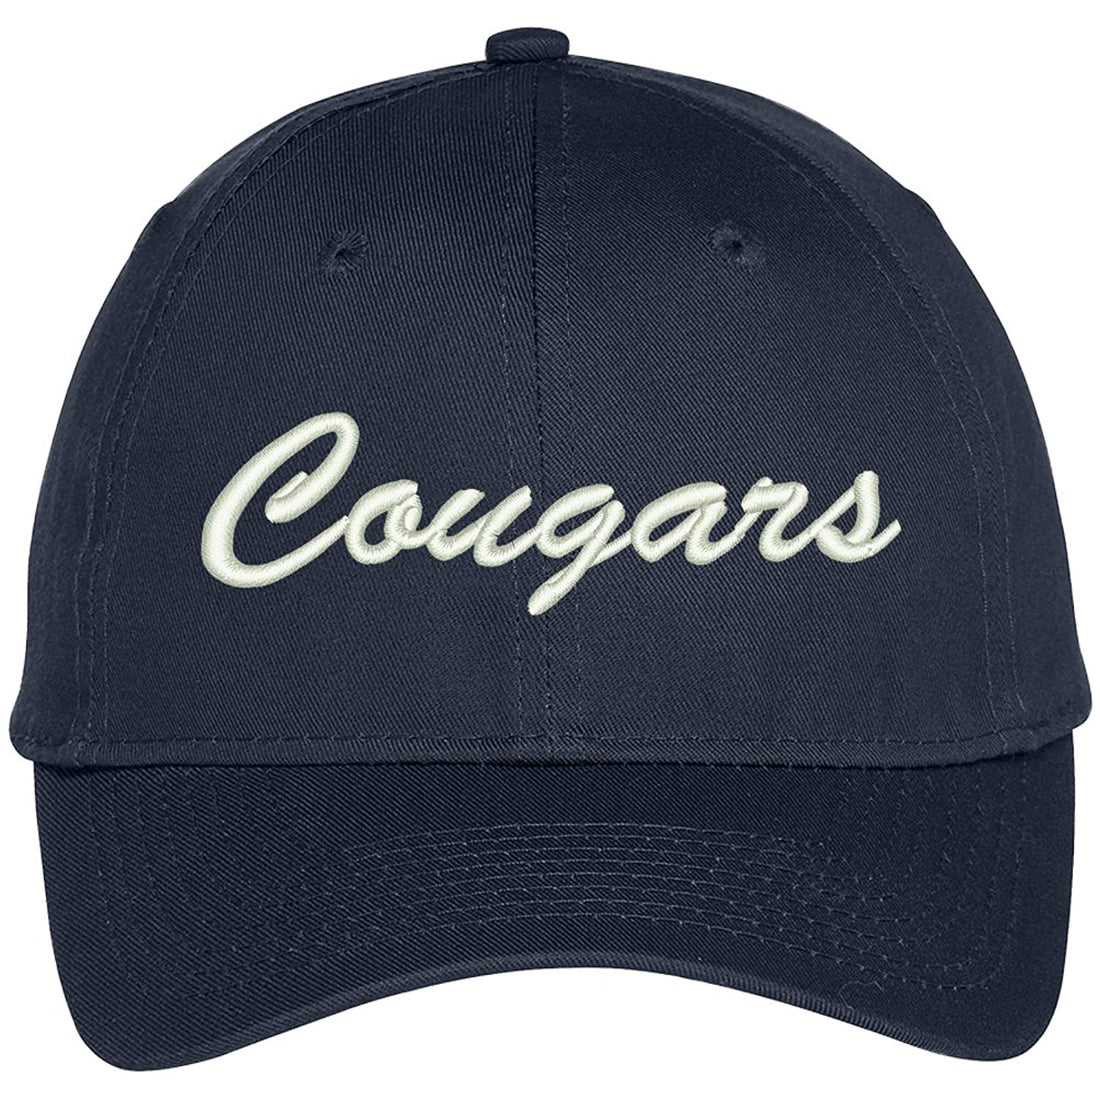 Trendy Apparel Shop Cougars Embroidered Team Nickname Mascot Cap